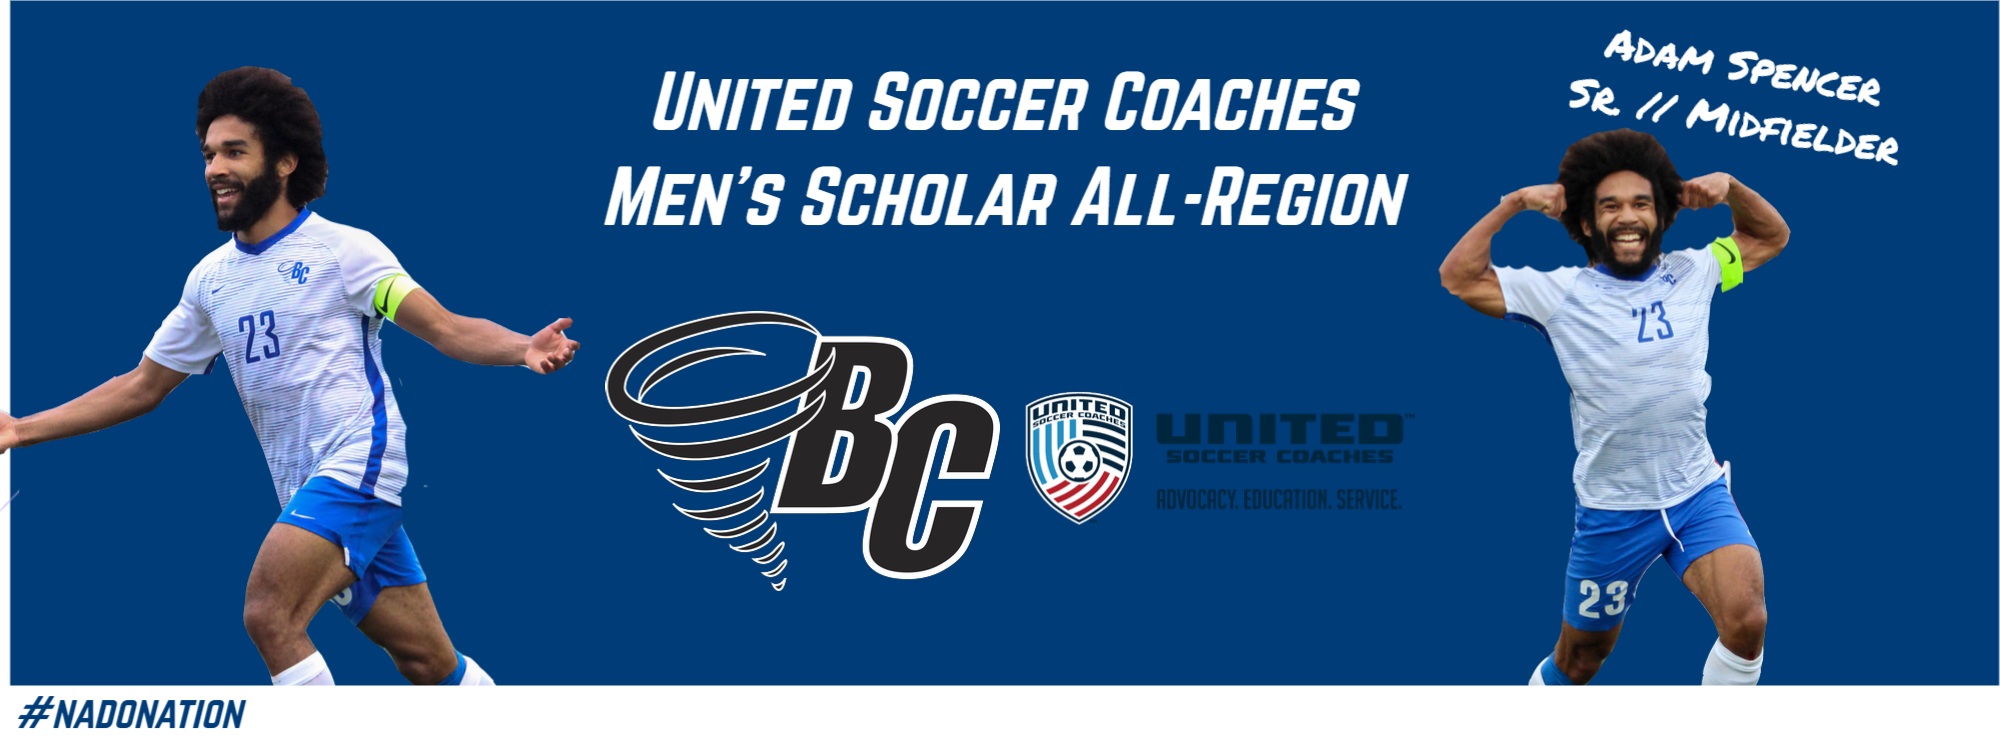 Spencer Selected as All-Region Men’s Scholar by United Soccer Coaches